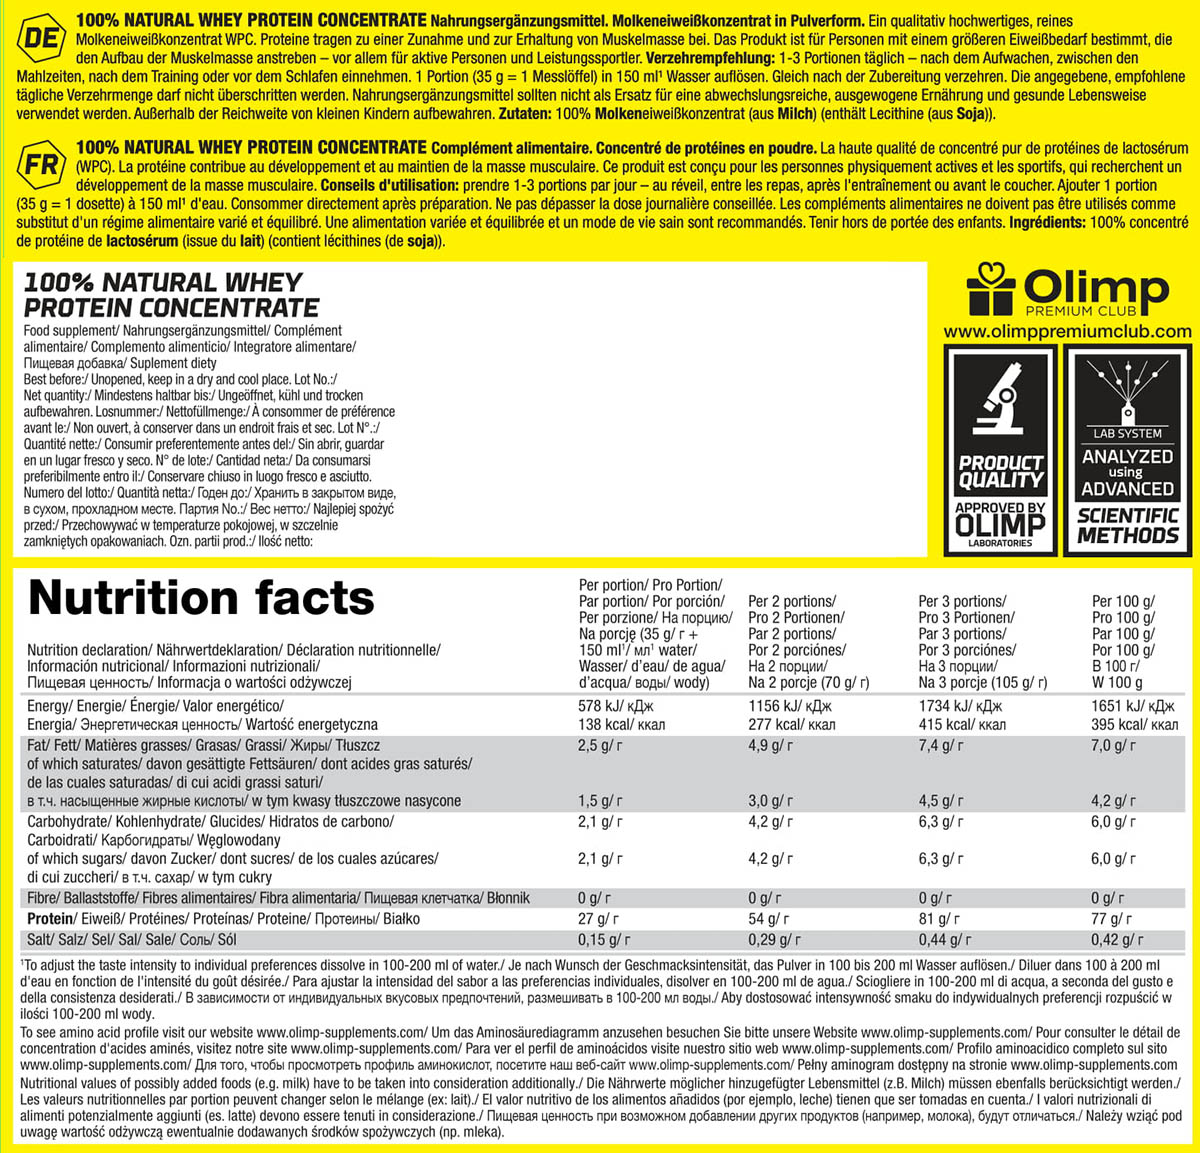 Olimp 100% Natural Whey Protein Concentrate (700g Beutel)